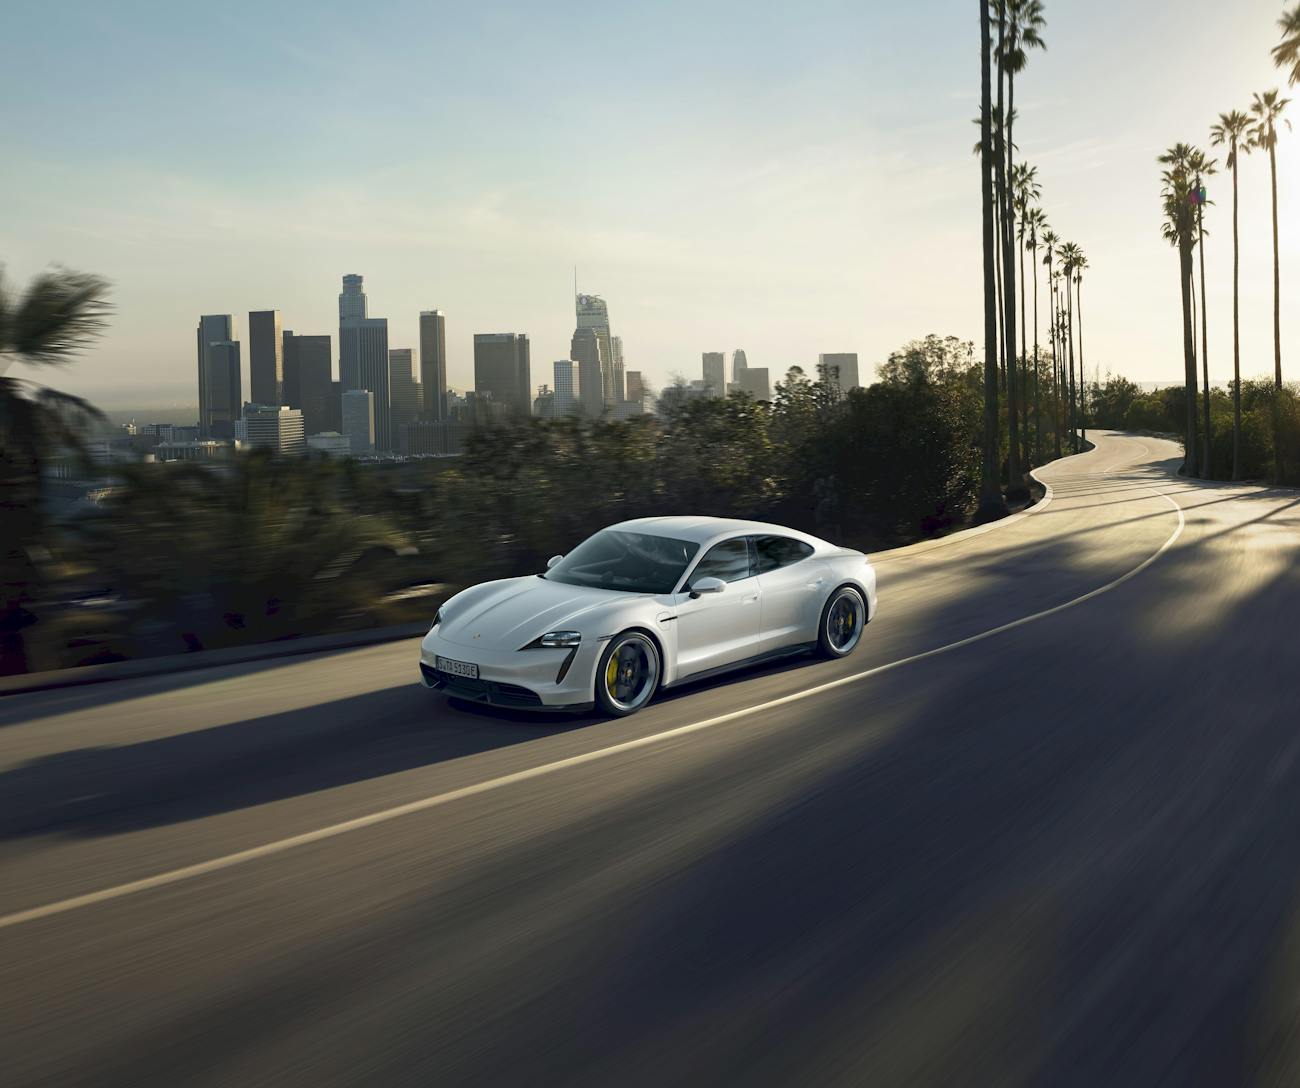 Porsche Taycan Turbo S on road, downtown Los Angeles behind